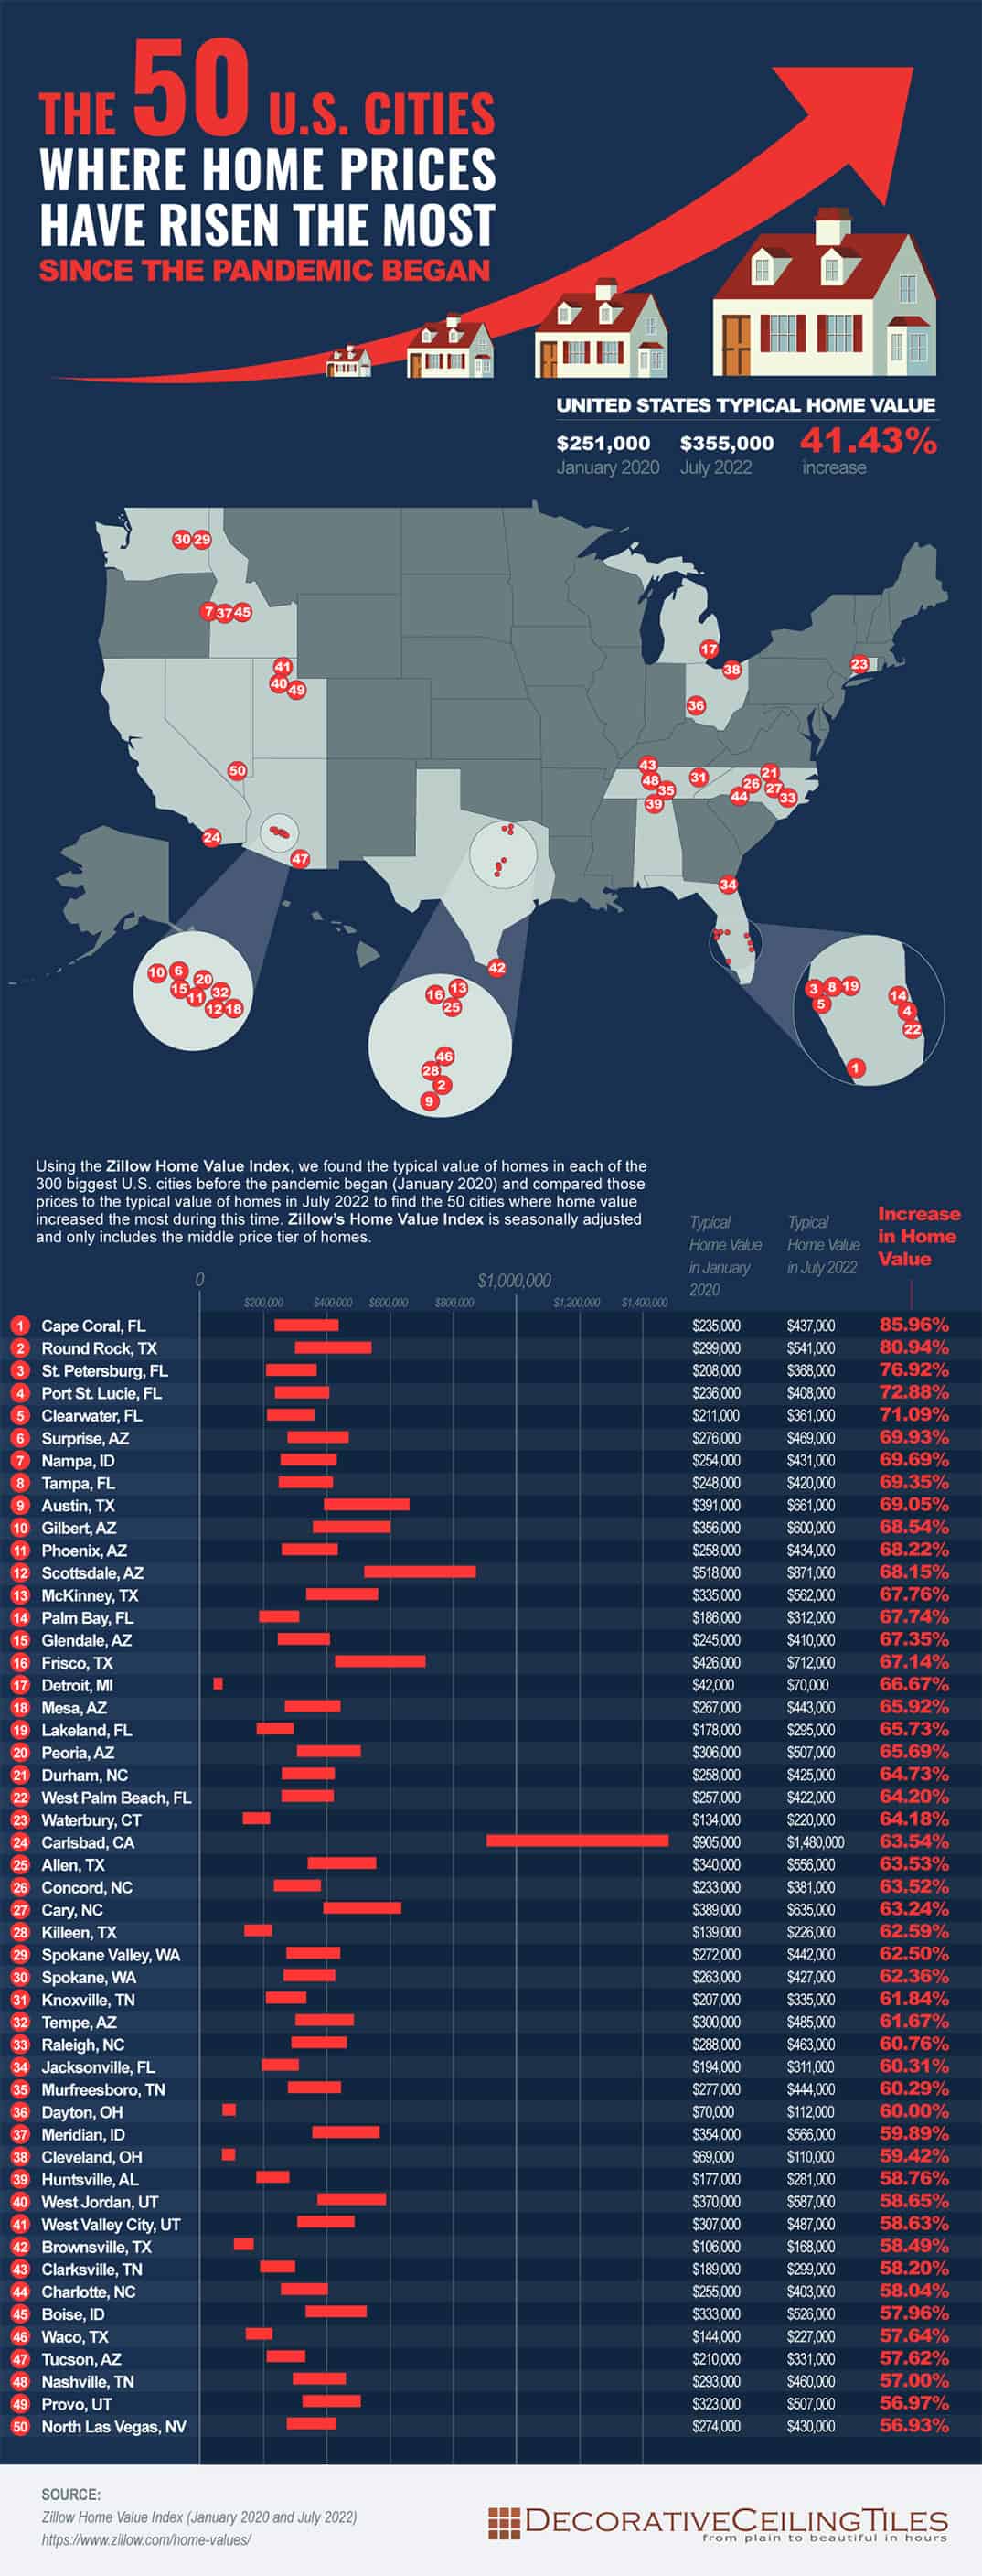 cities-home-prices-risen-most